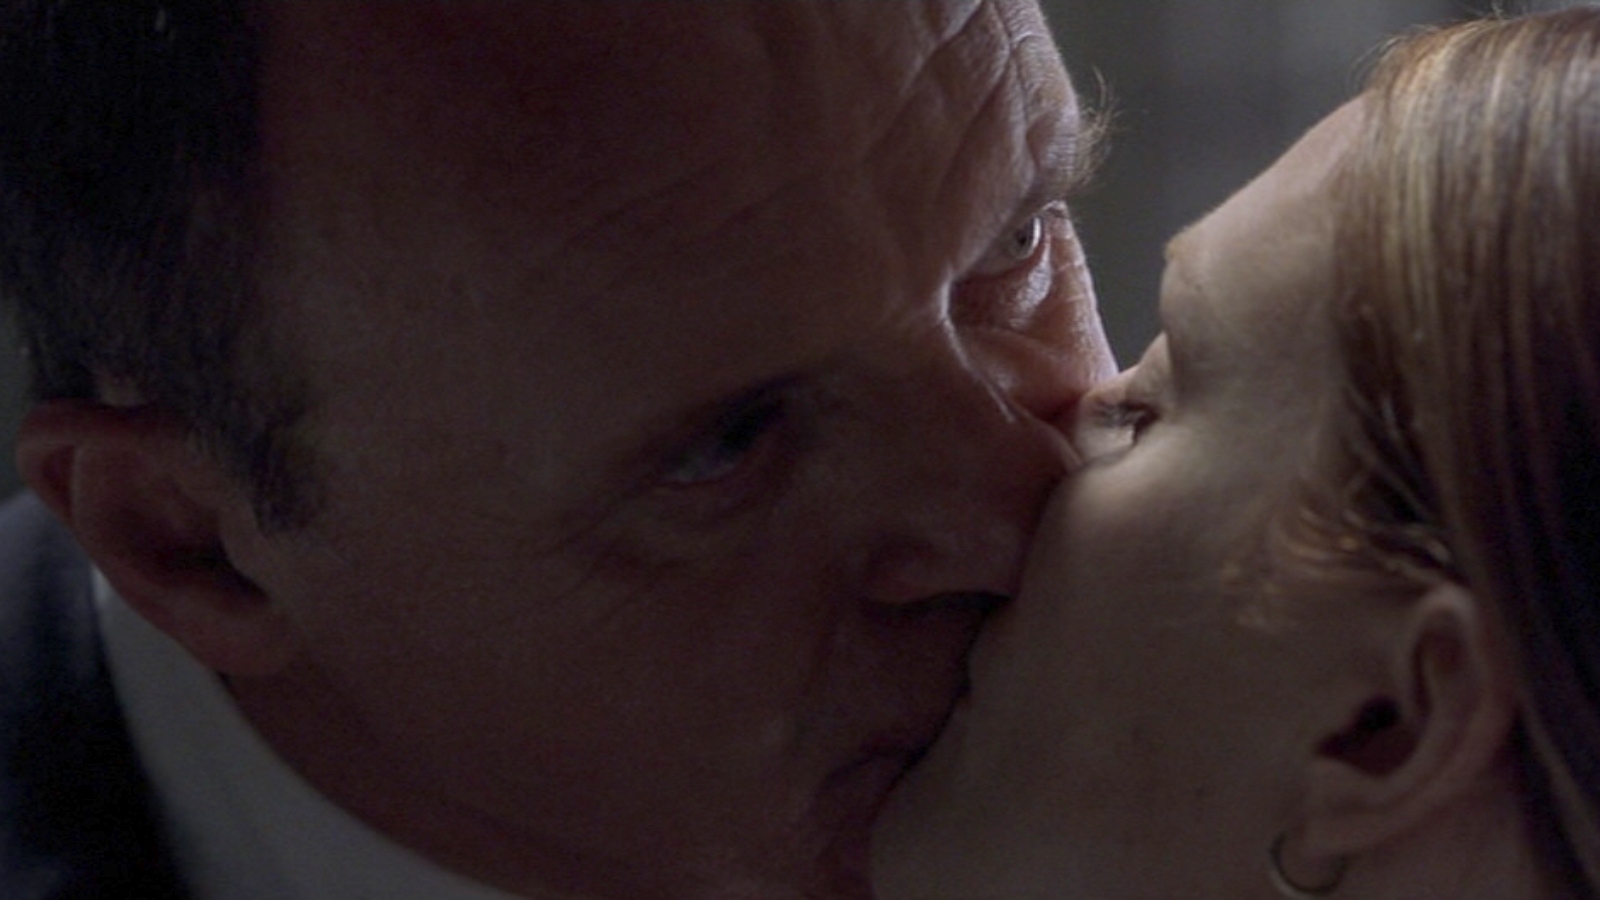 Anthony Hopkins as Hannibal Lecter kissing Julianne Moore as Clarice Starling